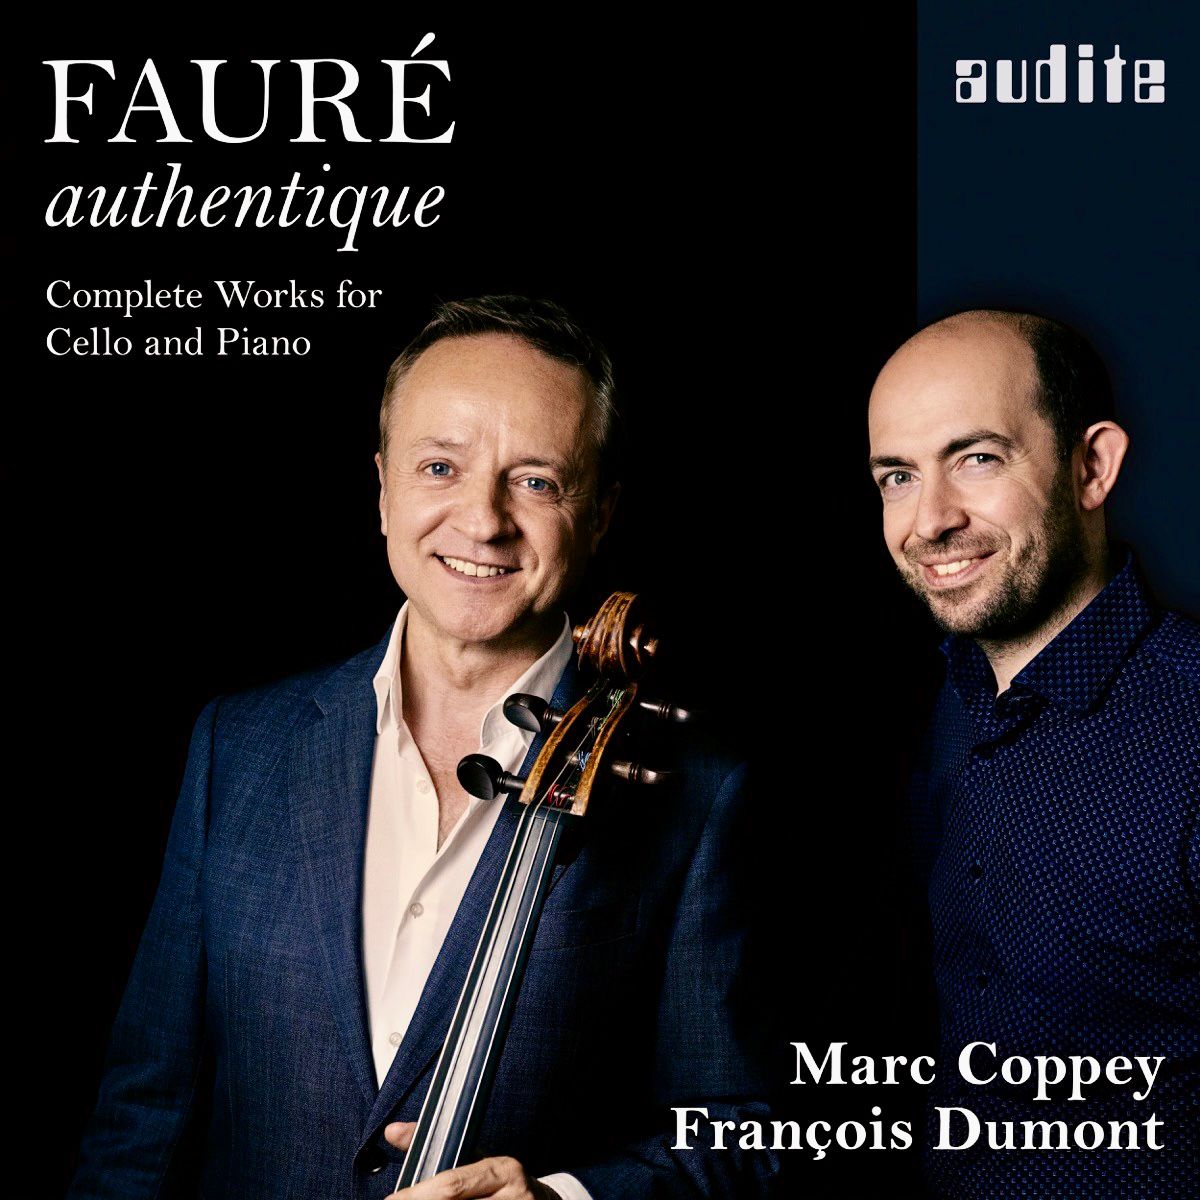 The 𝗙𝗮𝘂𝗿𝗲́ 𝗮𝘂𝘁𝗵𝗲𝗻𝘁𝗶𝗾𝘂𝗲 album we recorded with @fdumontpiano is now available on all platforms! We hope you'll enjoy listening to it as much as we did recording it. 💿 Audite 🎧#GabrielFauré ➡ play.audite.de/faure-authenti…